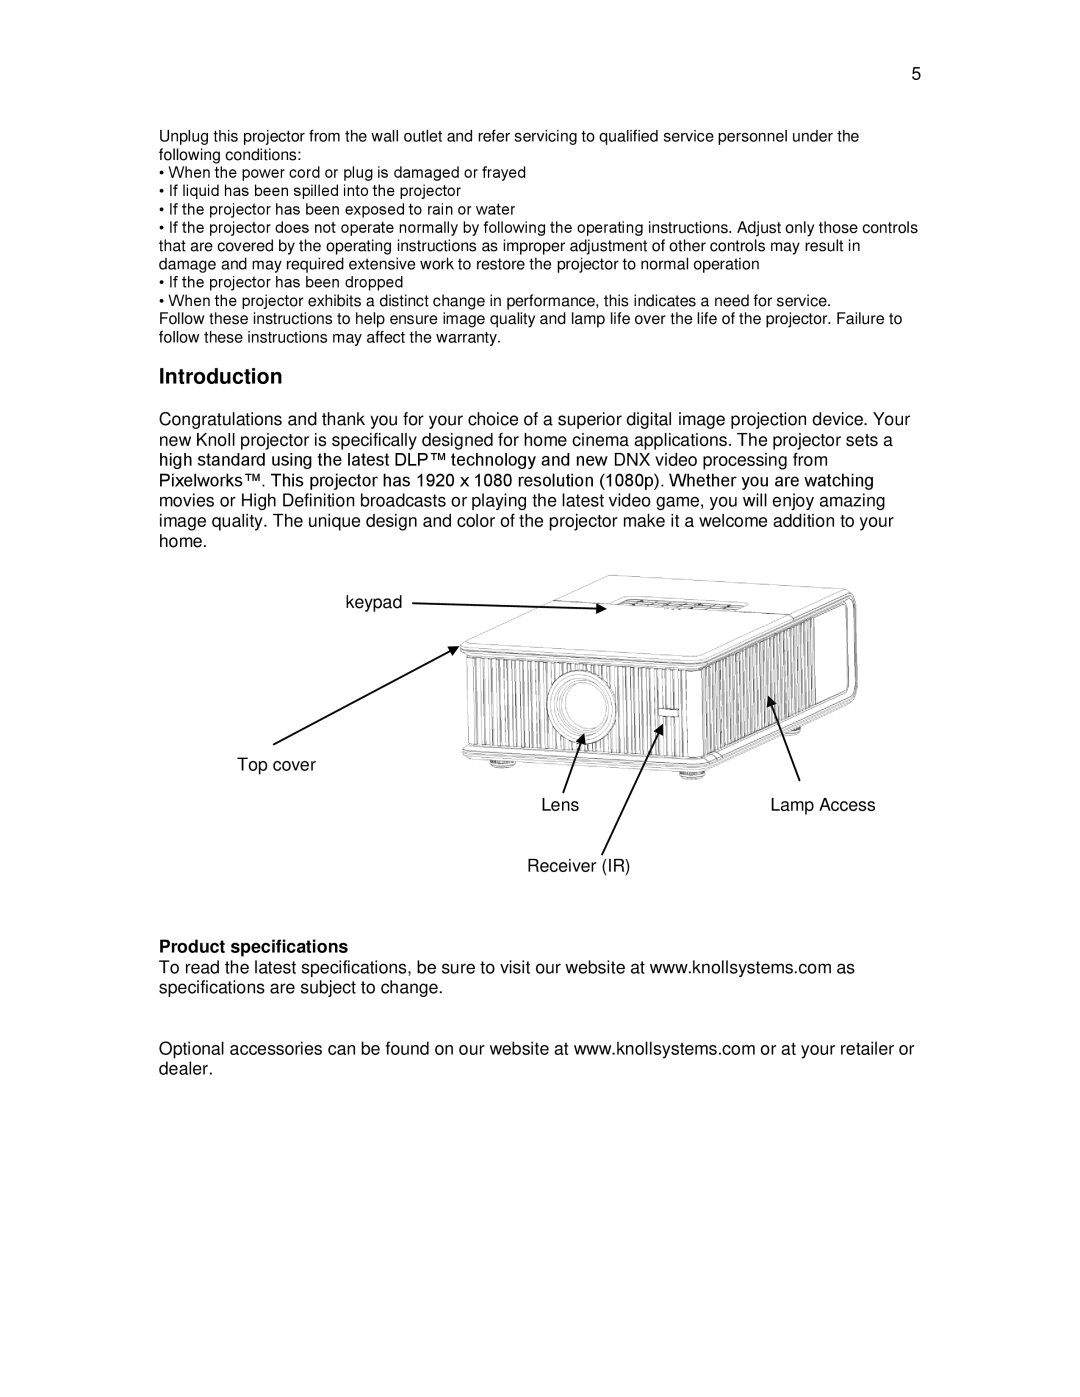 Knoll Systems HDP6000 user manual Introduction, Product specifications 